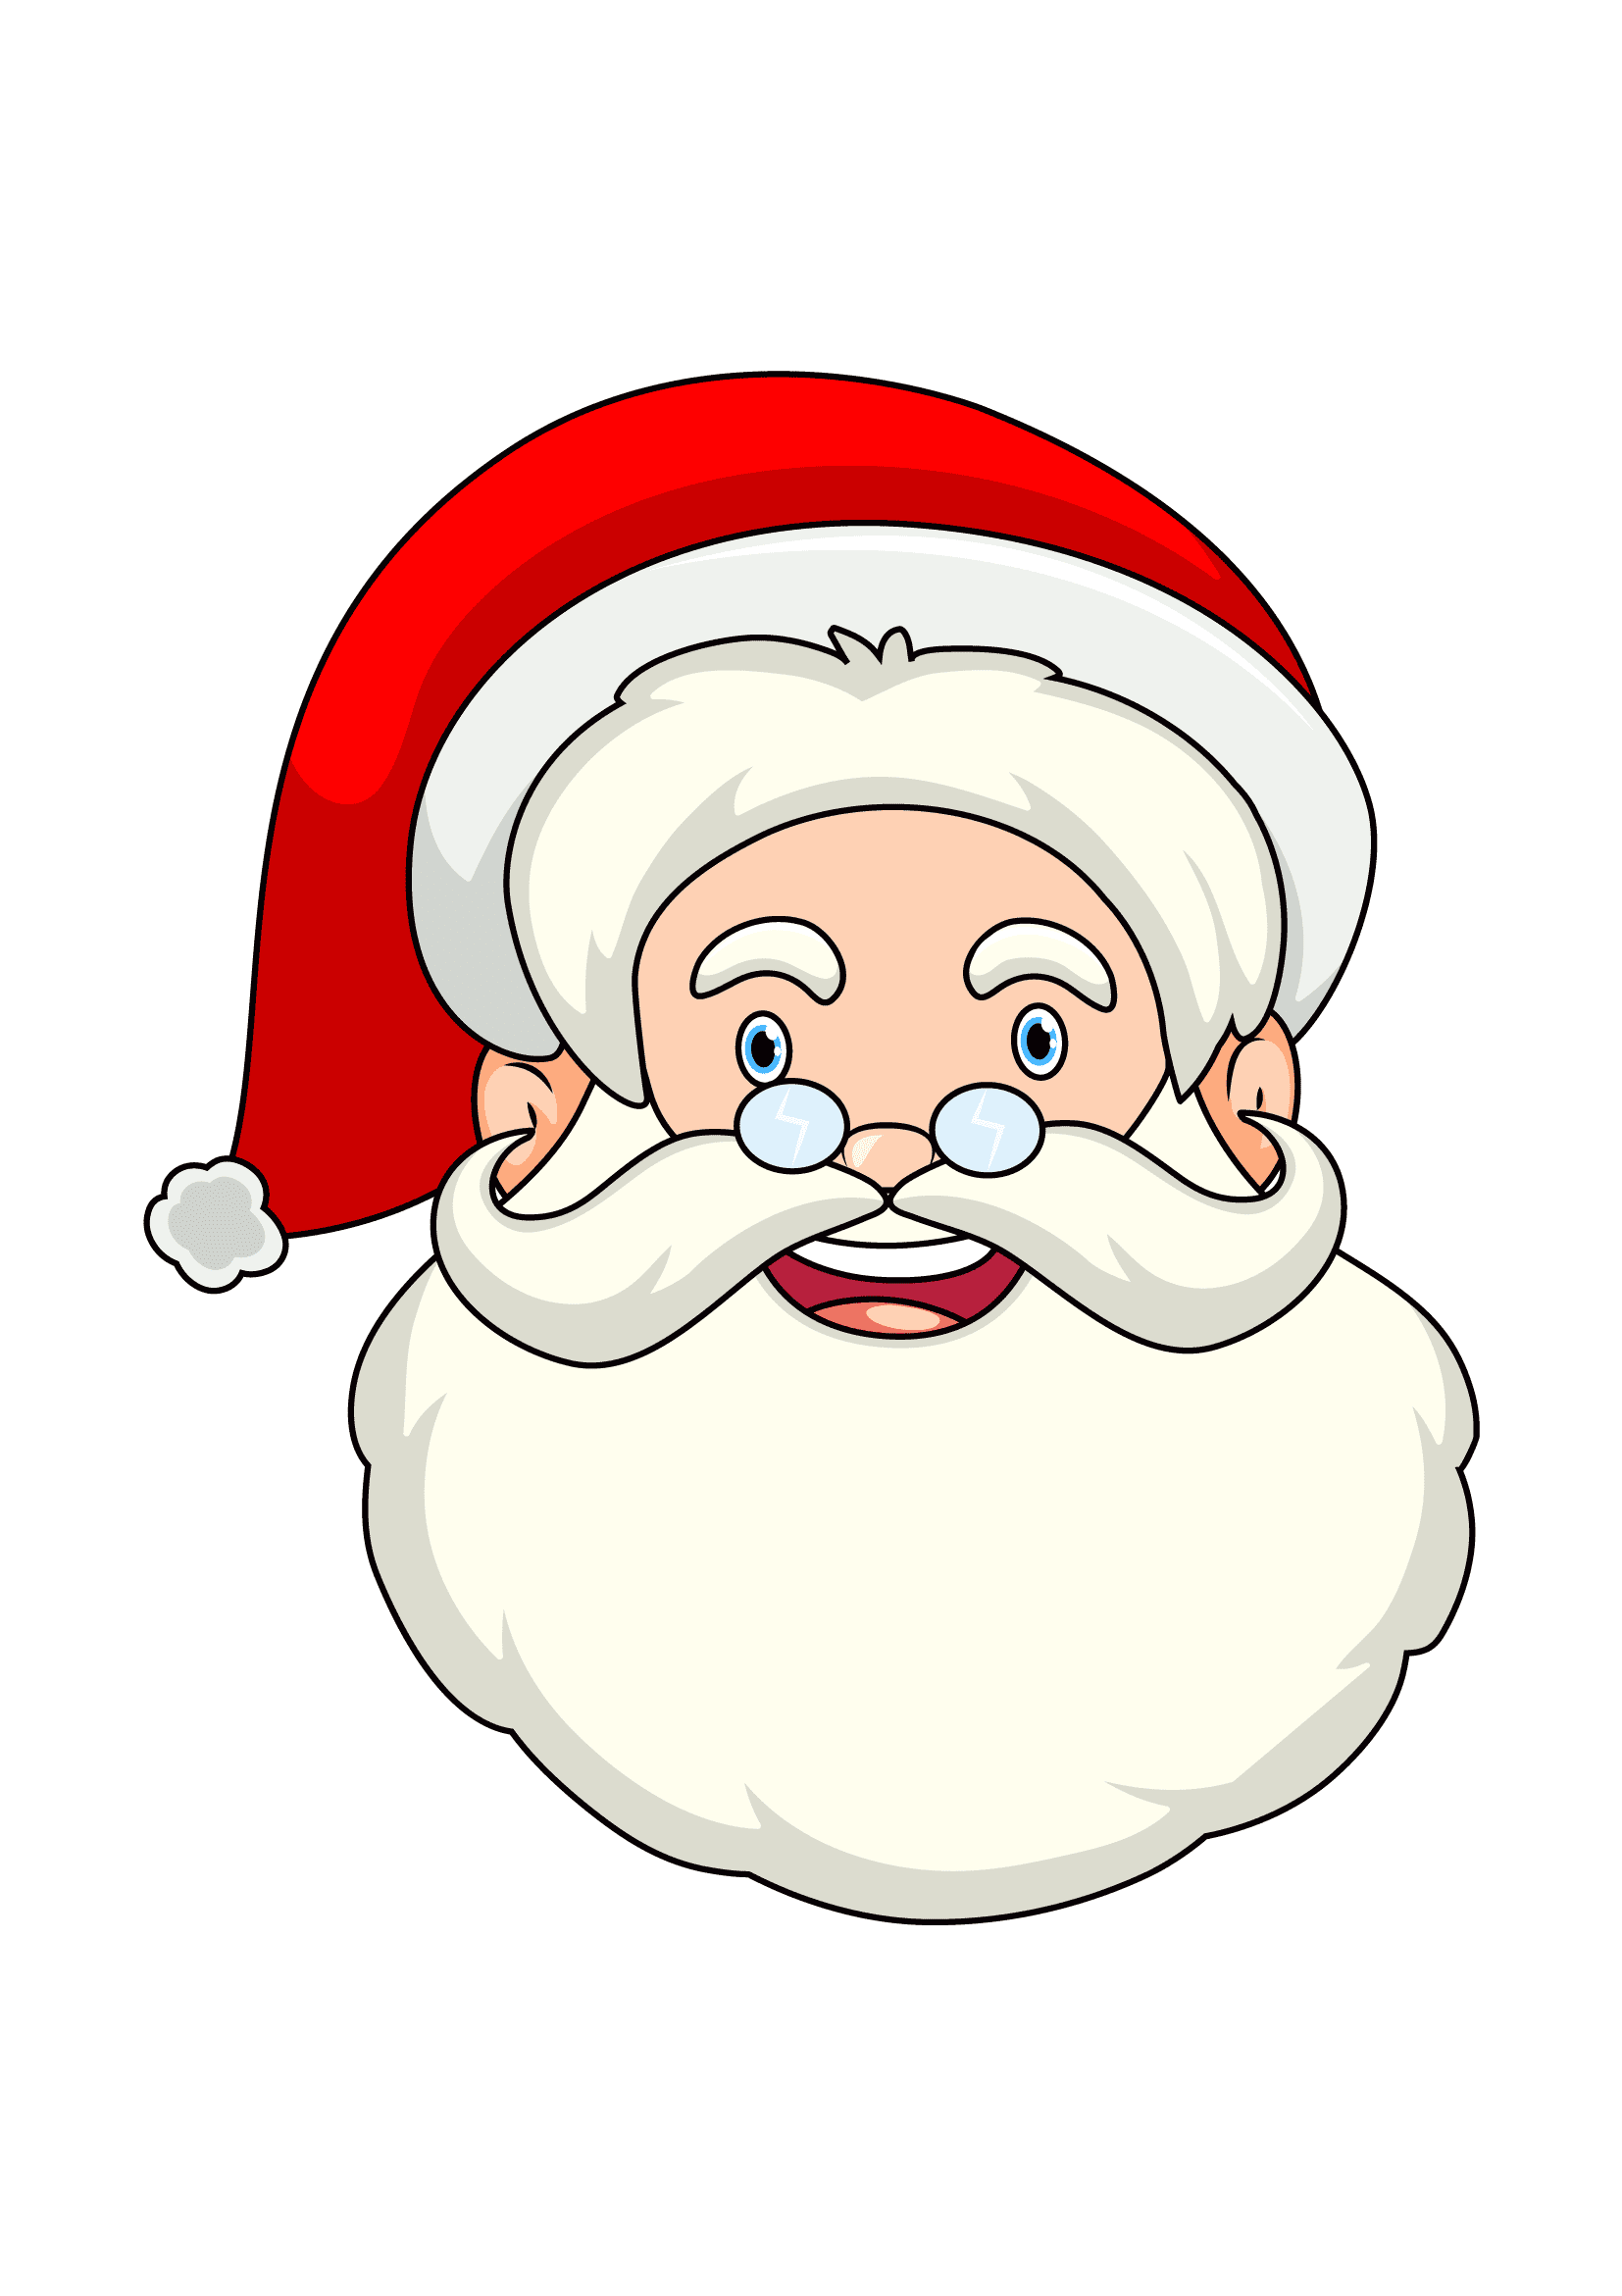 How to Draw A Santa Face Step by Step Printable